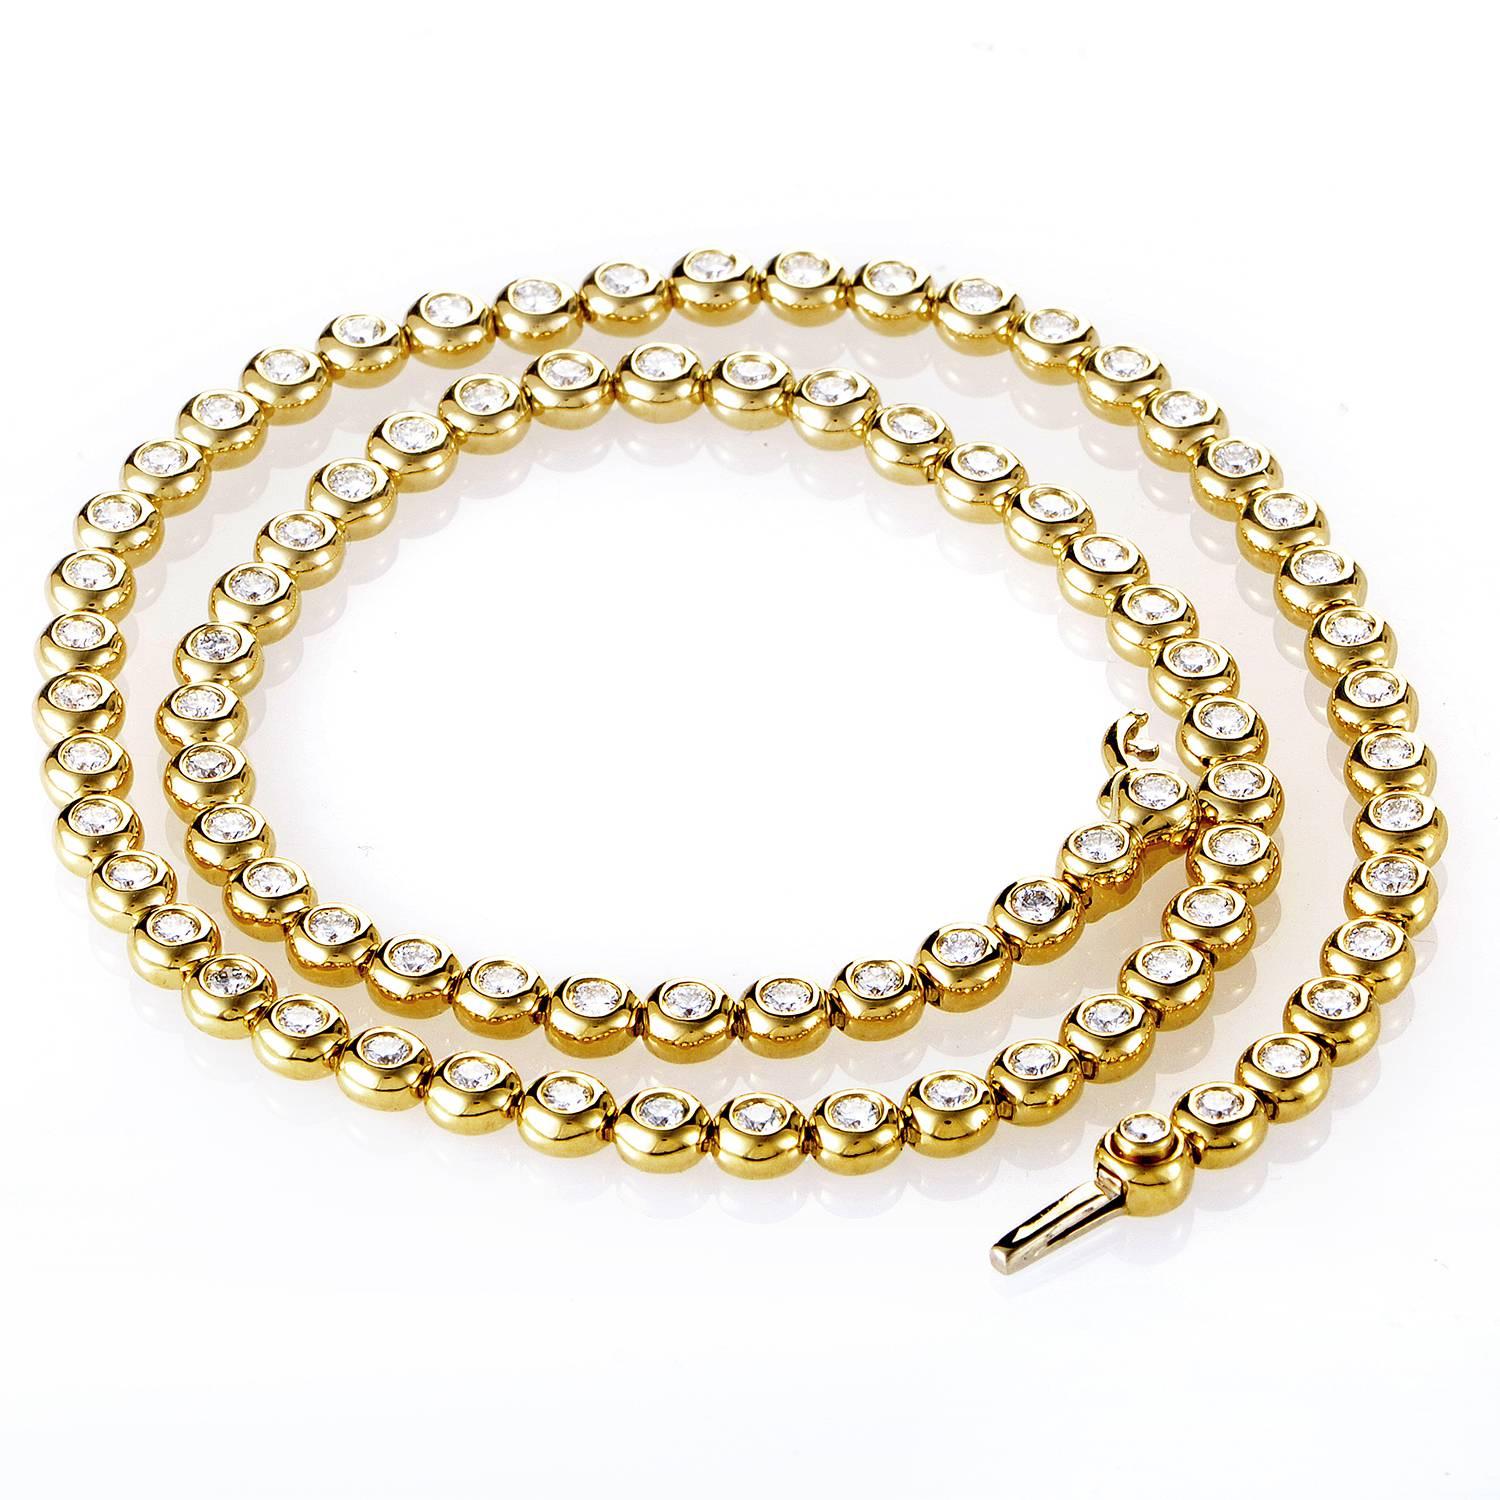 A rippling stream of precious ingredients pours in perfect harmony in this elegant necklace from Tiffany. A series of smooth, segmented rivulets of 18K Yellow Gold drop in fluid formation. Each segment shares the task of harboring 6.50ct diamonds.